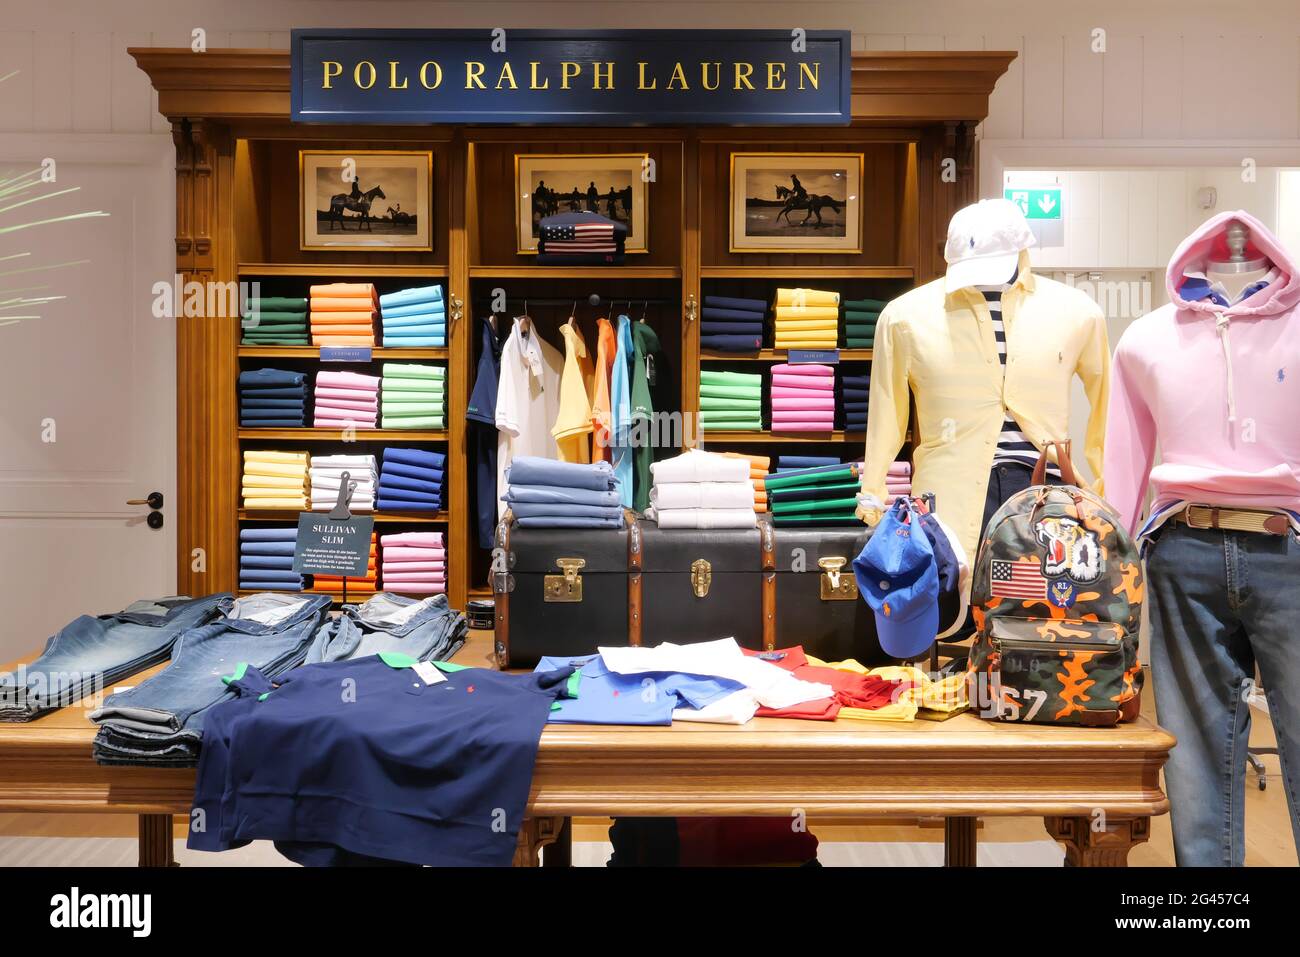 TSHIRTS ON DISPLAY AT POLO RALPF LAUREN BOUTIQUE INSIDE THE RINASCENTE  FASHION STORE Stock Photo - Alamy